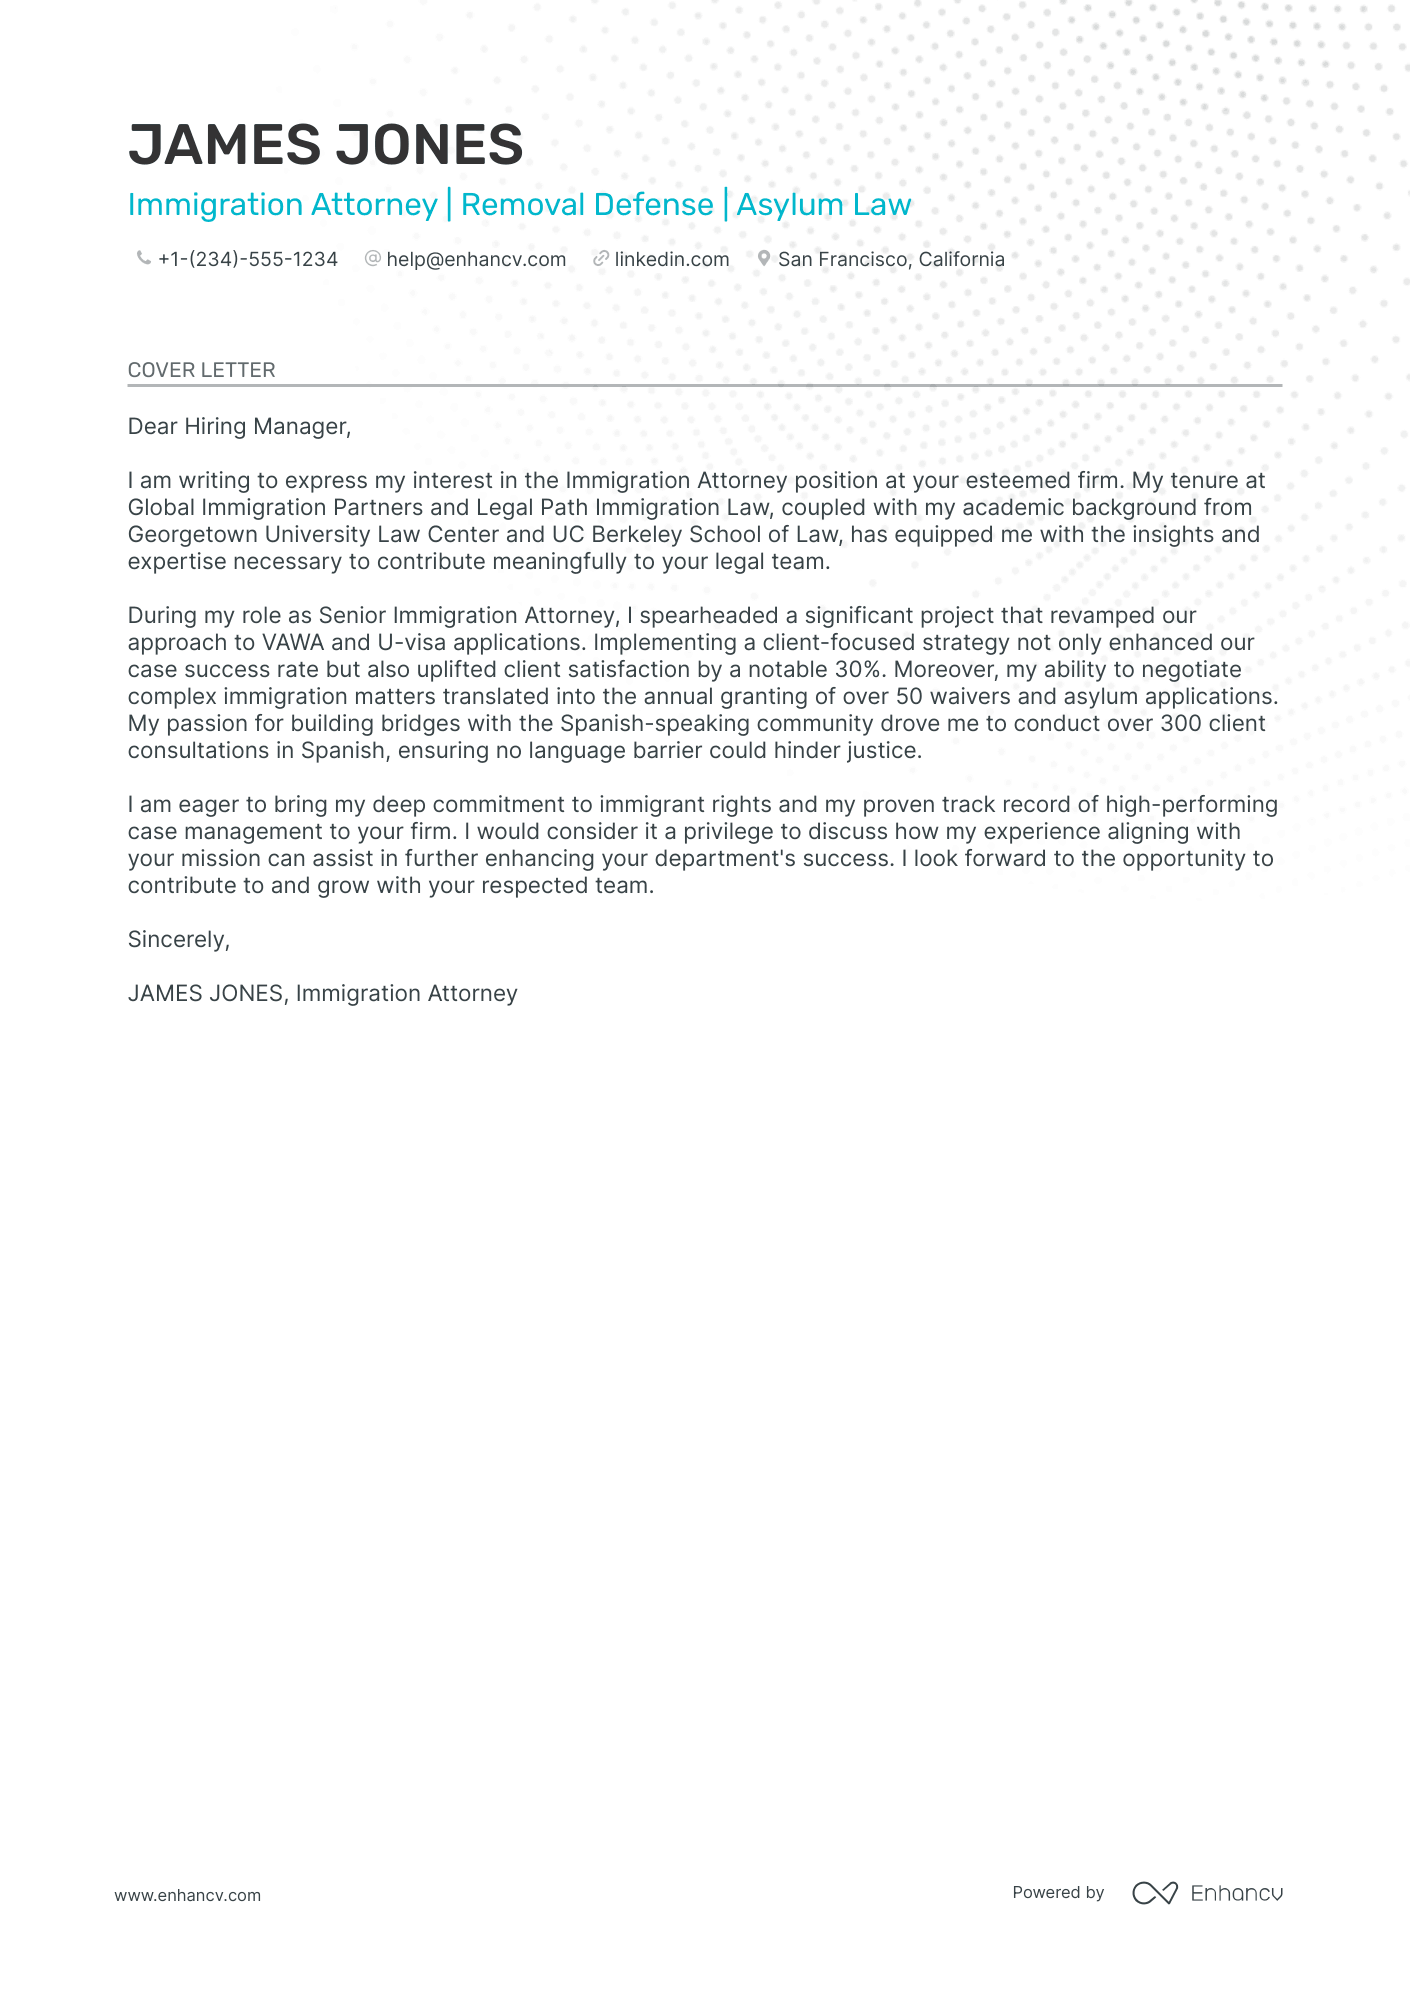 Immigration Lawyer cover letter